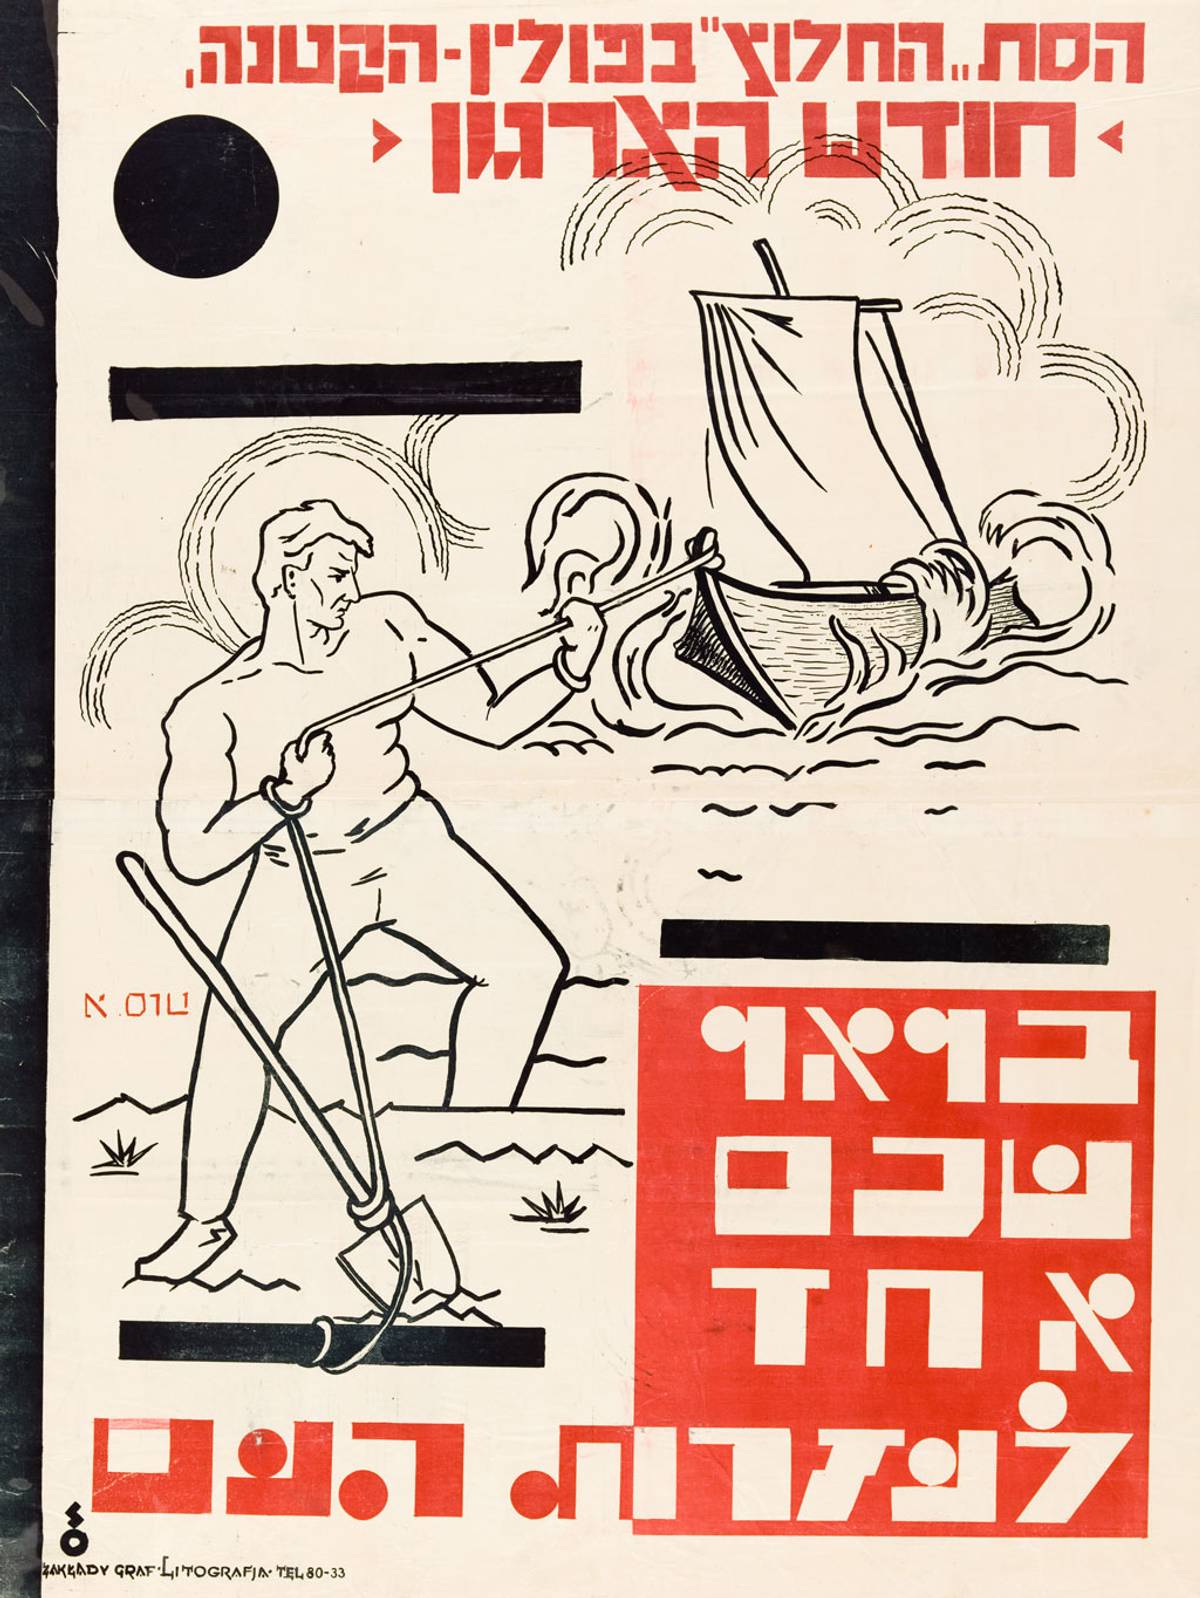 Propaganda poster for Hekhalutz’s “Organization Month,” with the slogan: “Come with one shoulder to the aid of the people,” Poland, 1930s. (From the archives of the YIVO Institute for Jewish Research, New York)